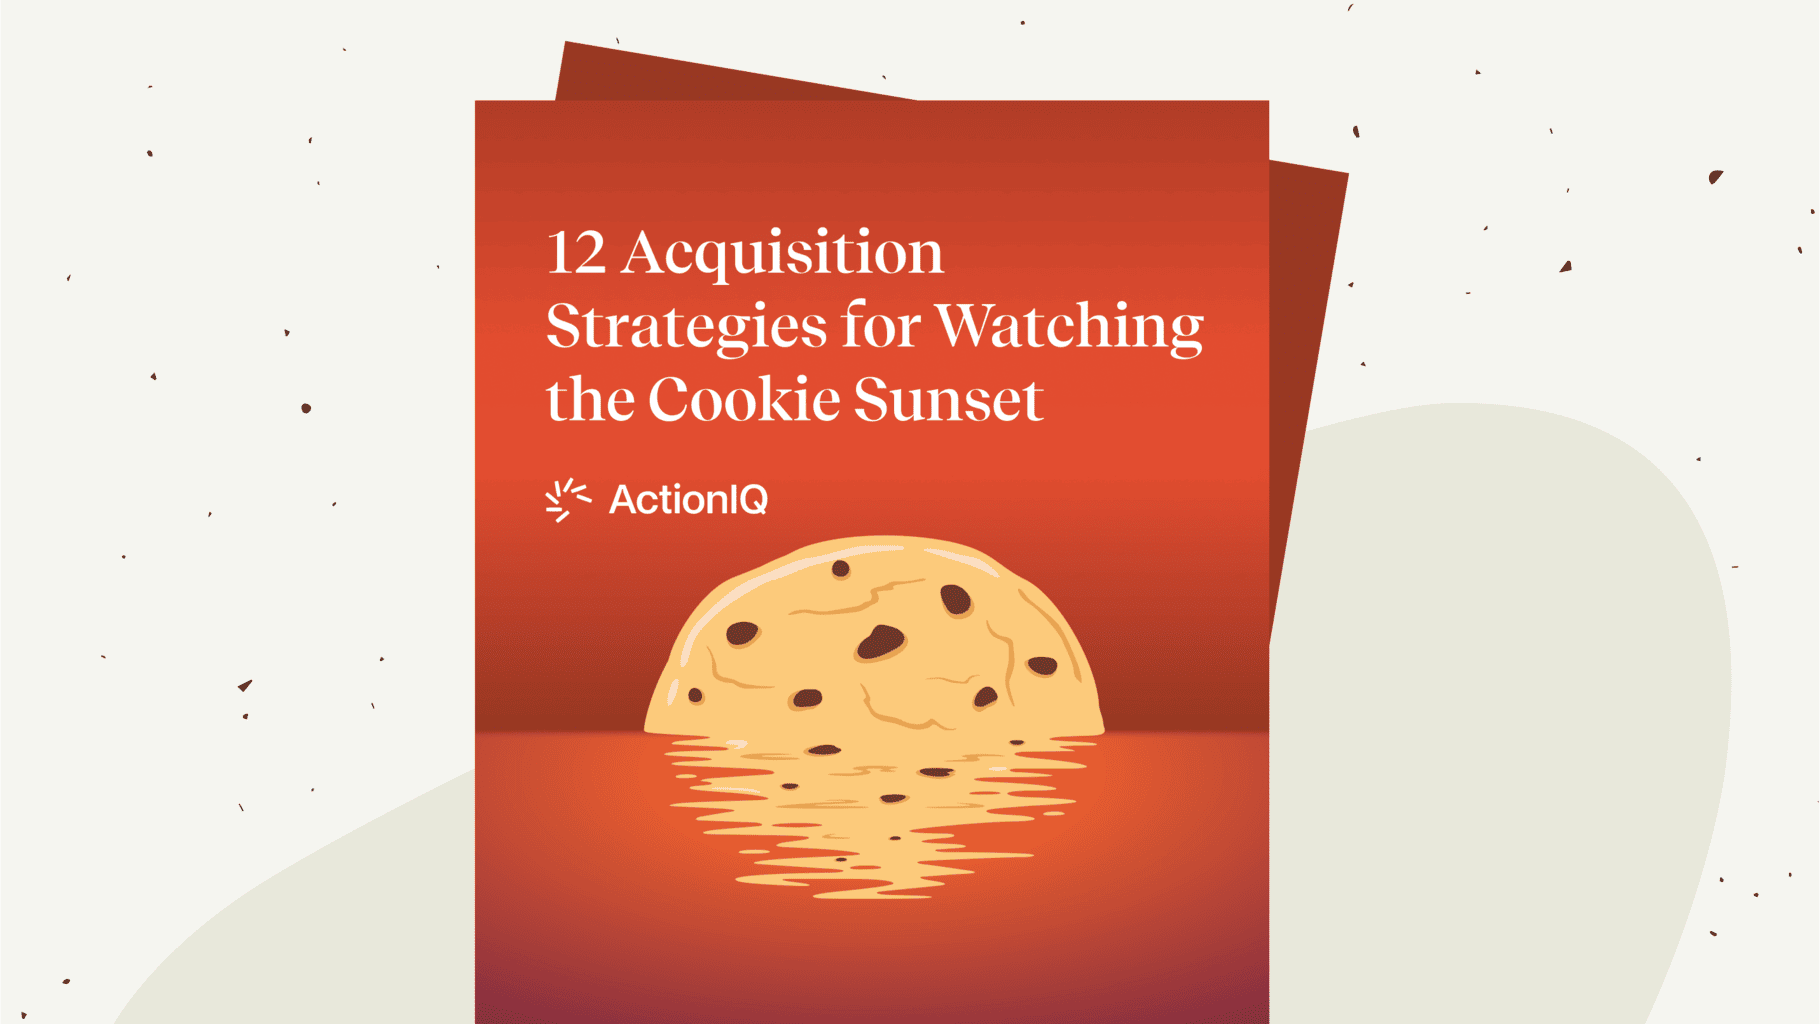 12 Acquisition Strategies for Watching the Cookie Sunset